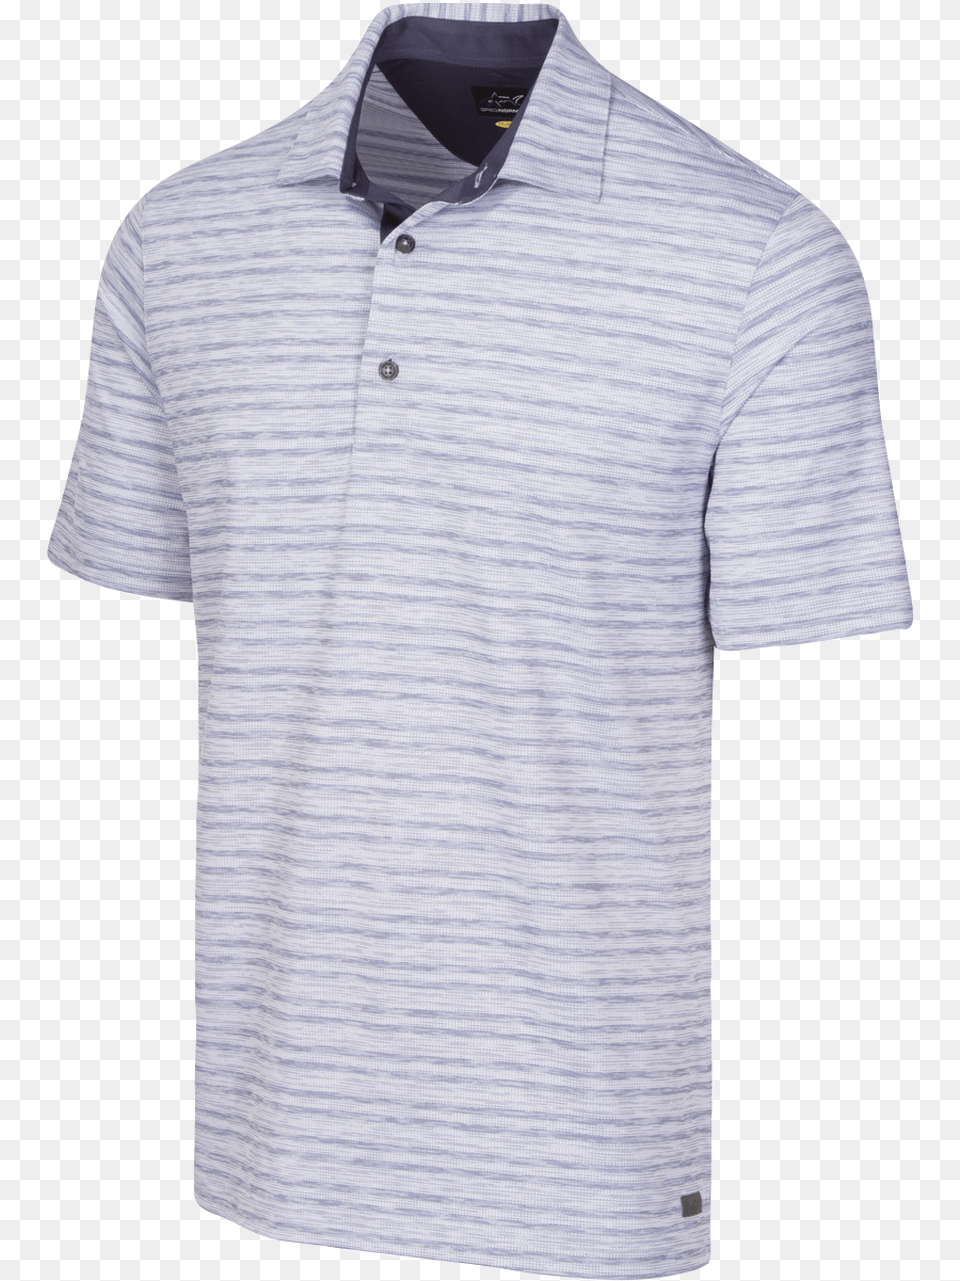 Haze Stretch Polo Solid, Clothing, Home Decor, Linen, Shirt Png Image